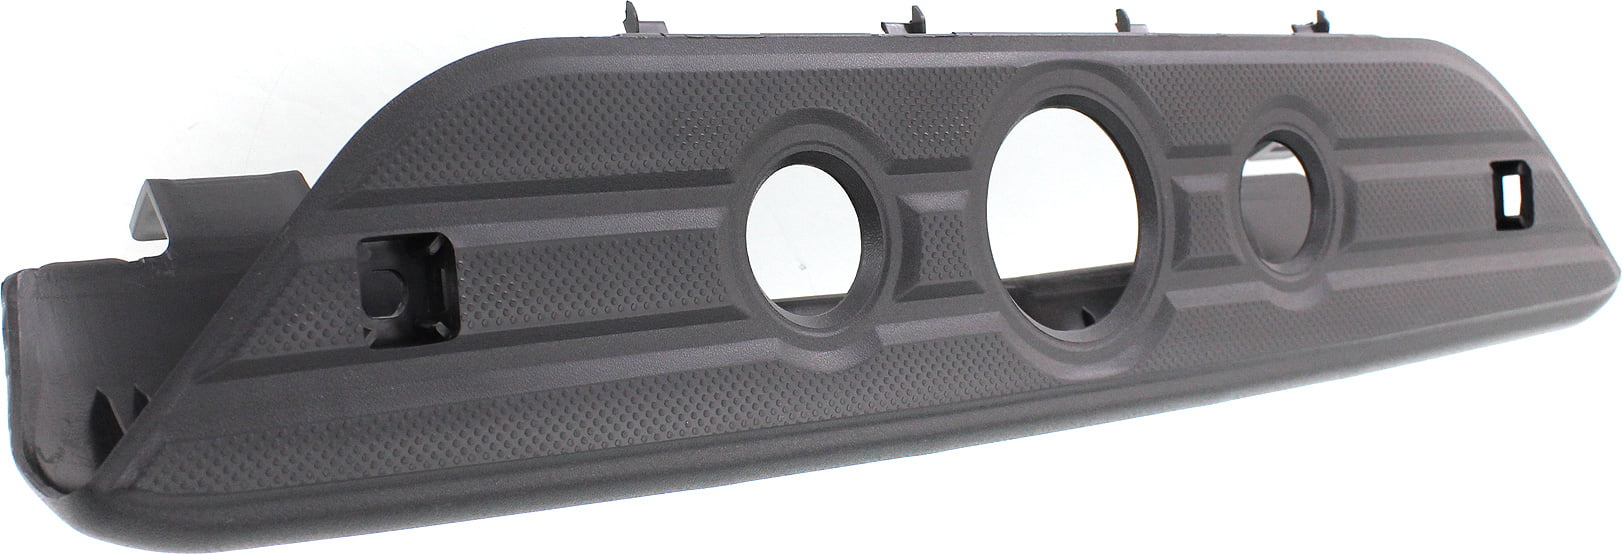 TO1190102 Make Auto Parts Manufacturing Rear Lower Pad Step Bumper With Center And Step Holes For Toyota Tacoma 2005-2015 